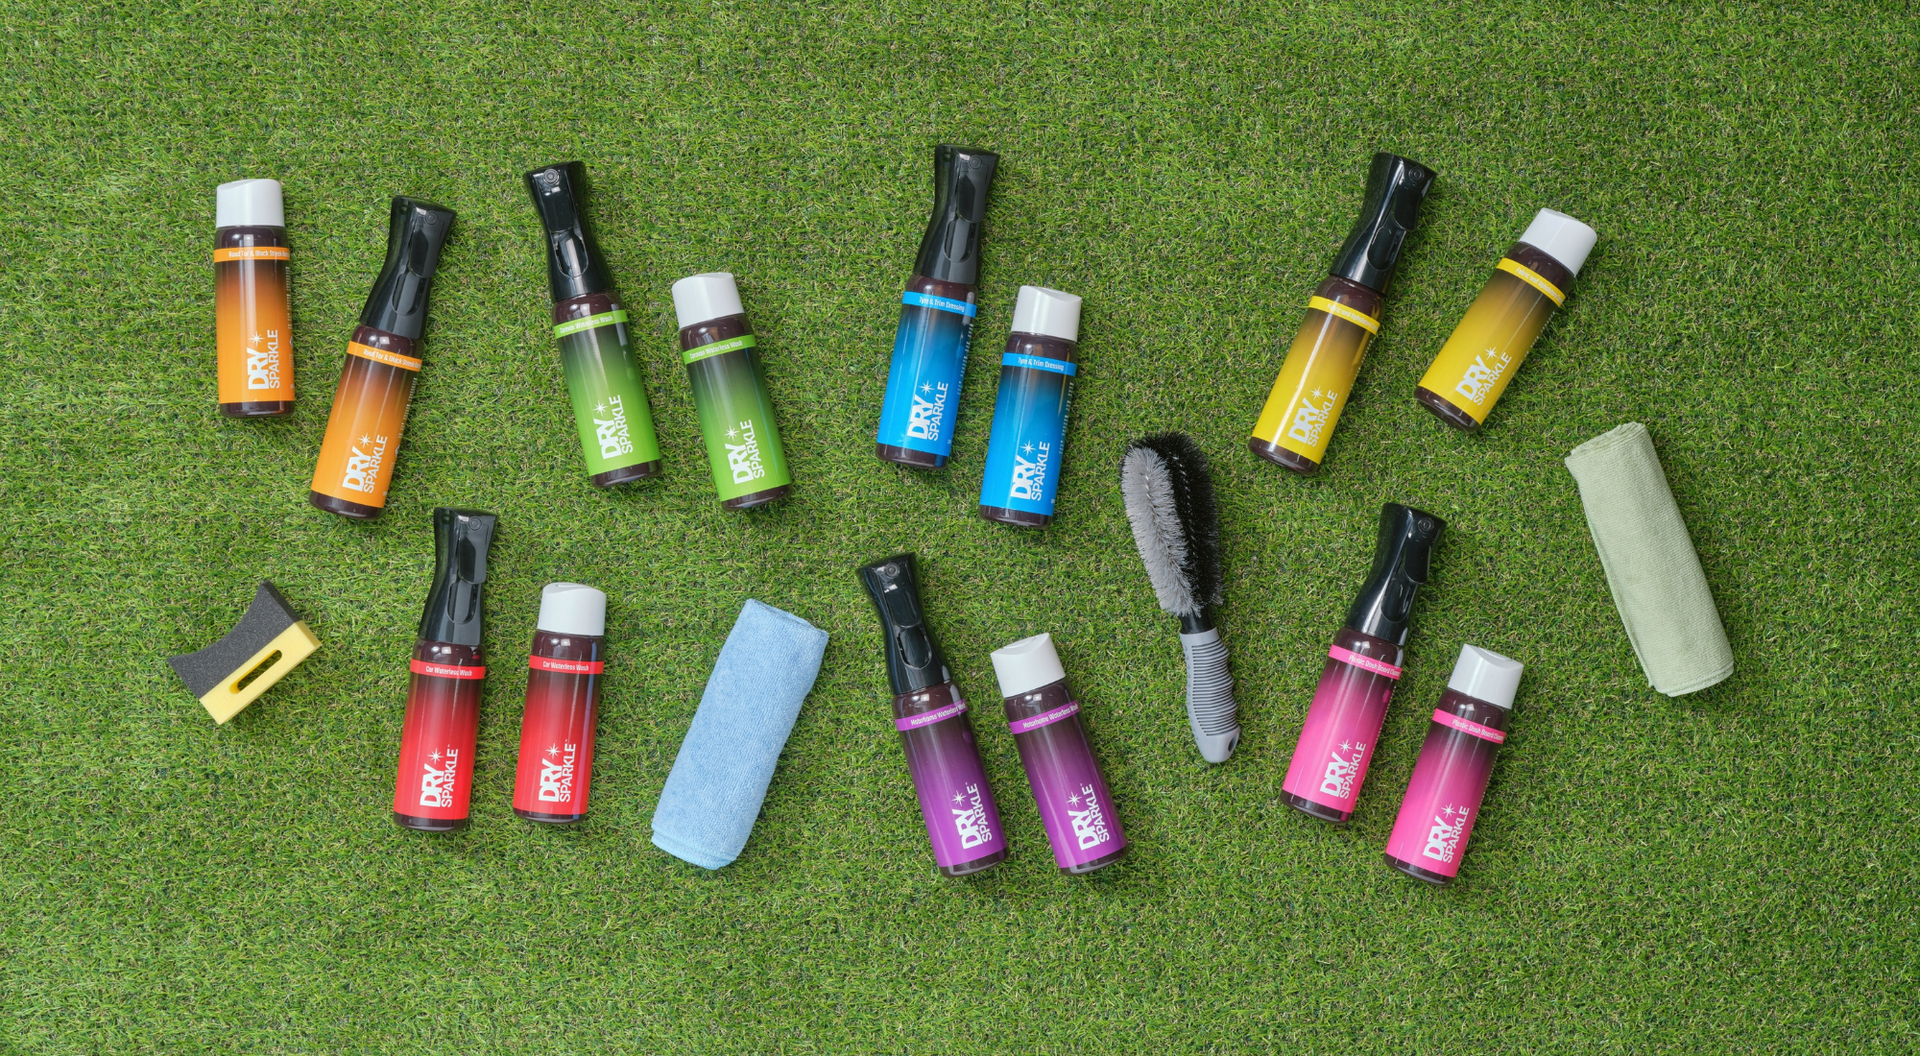  collection of waterless cleaners drysparkle